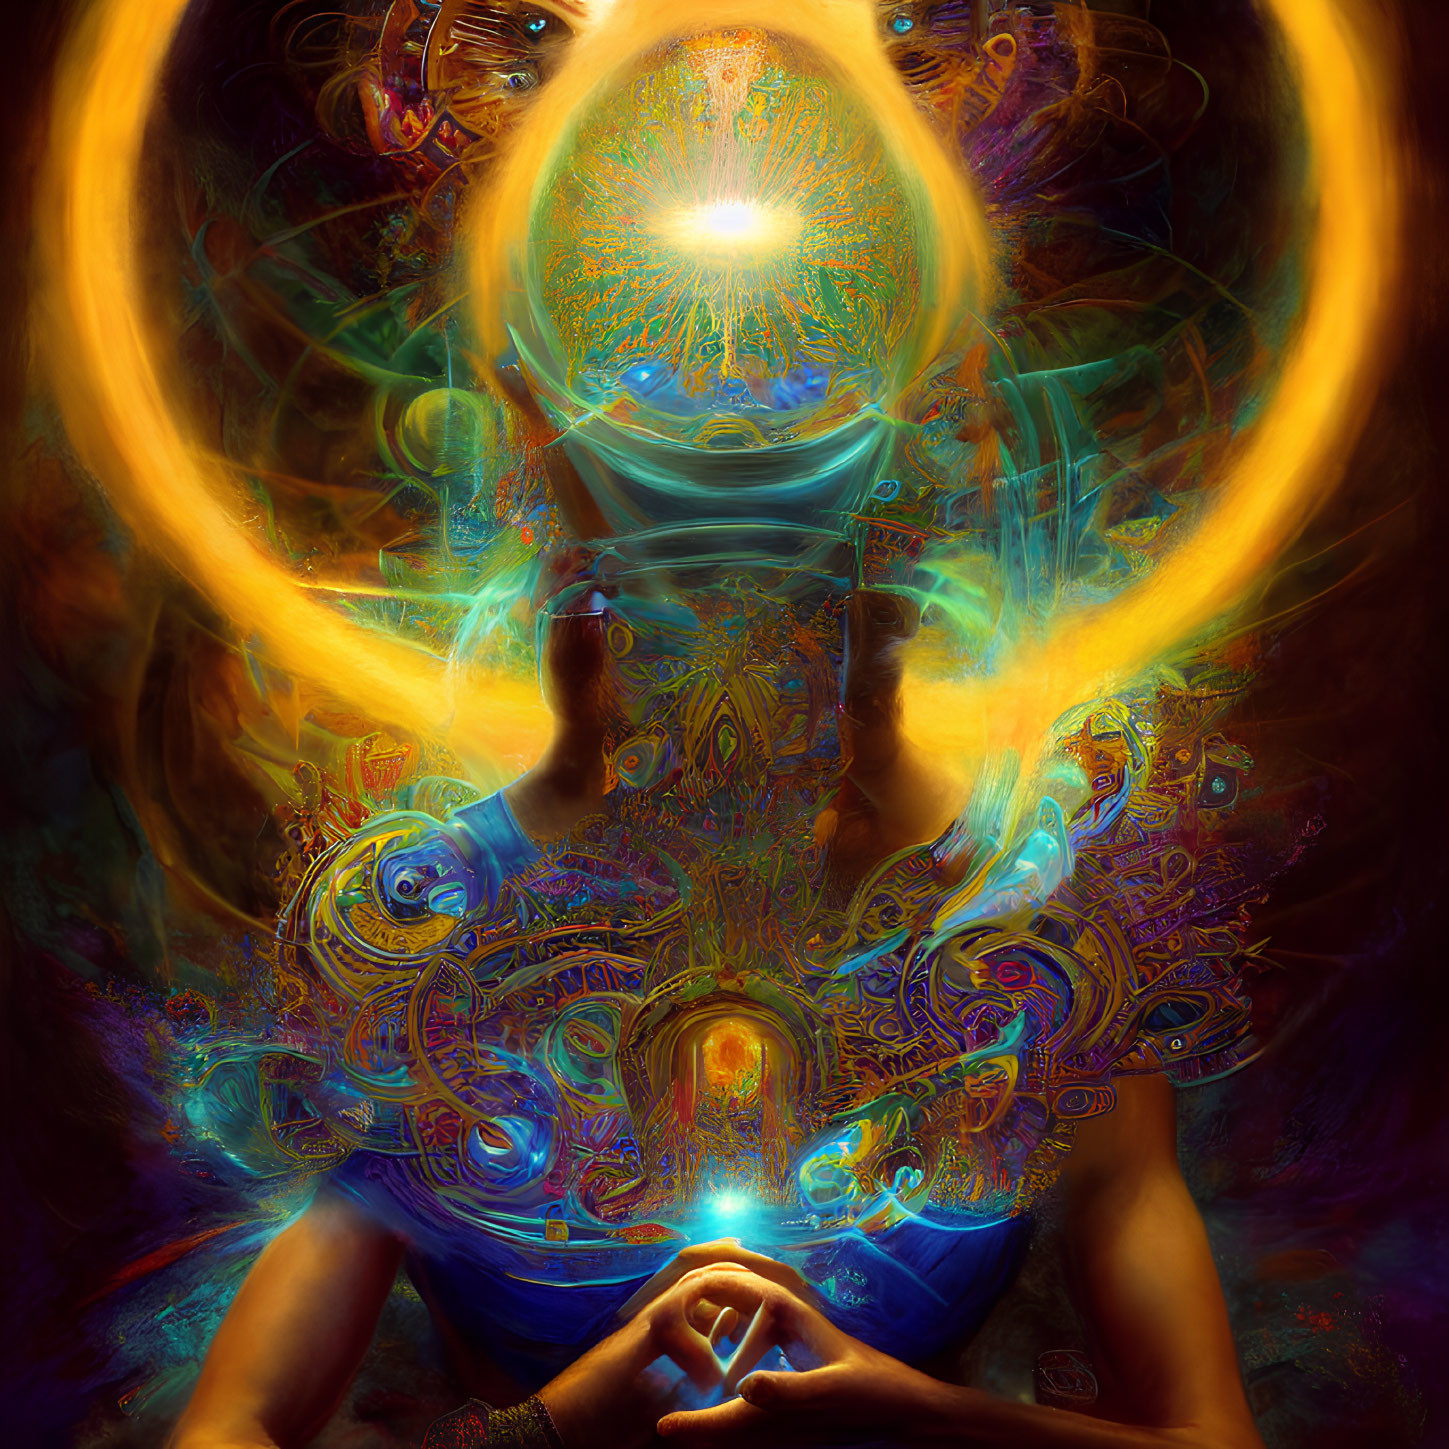 Abstract image of person meditating with glowing patterns and energy rings